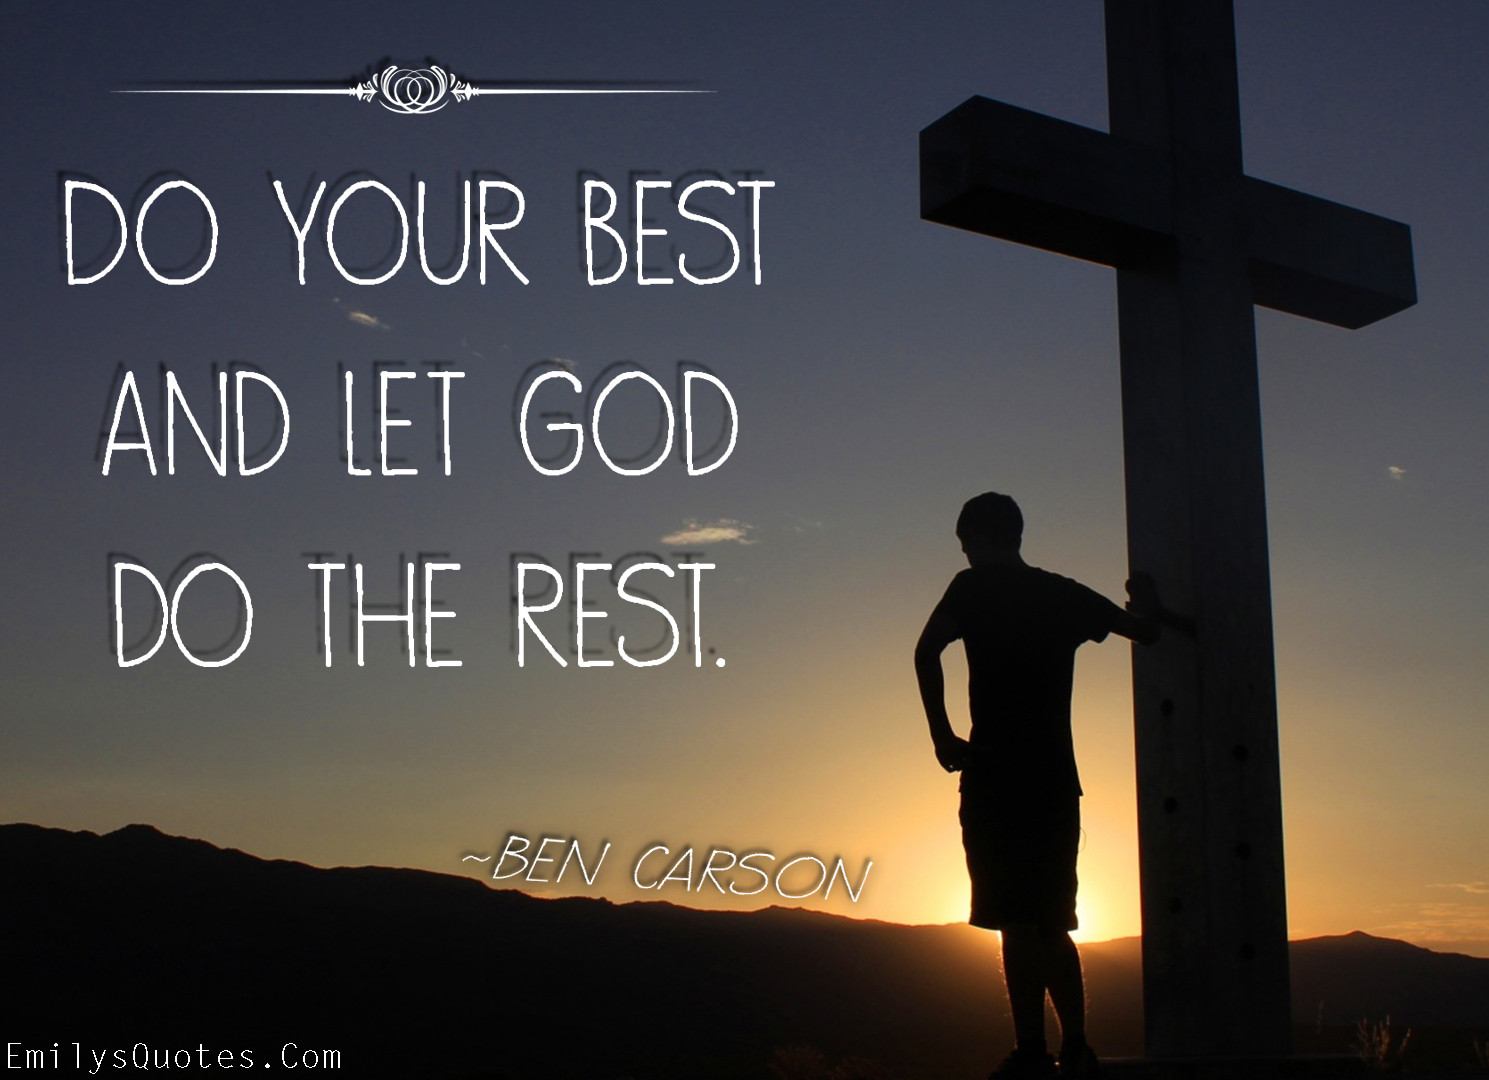 Inspirational Quotes About God
 Put Your Faith In Him